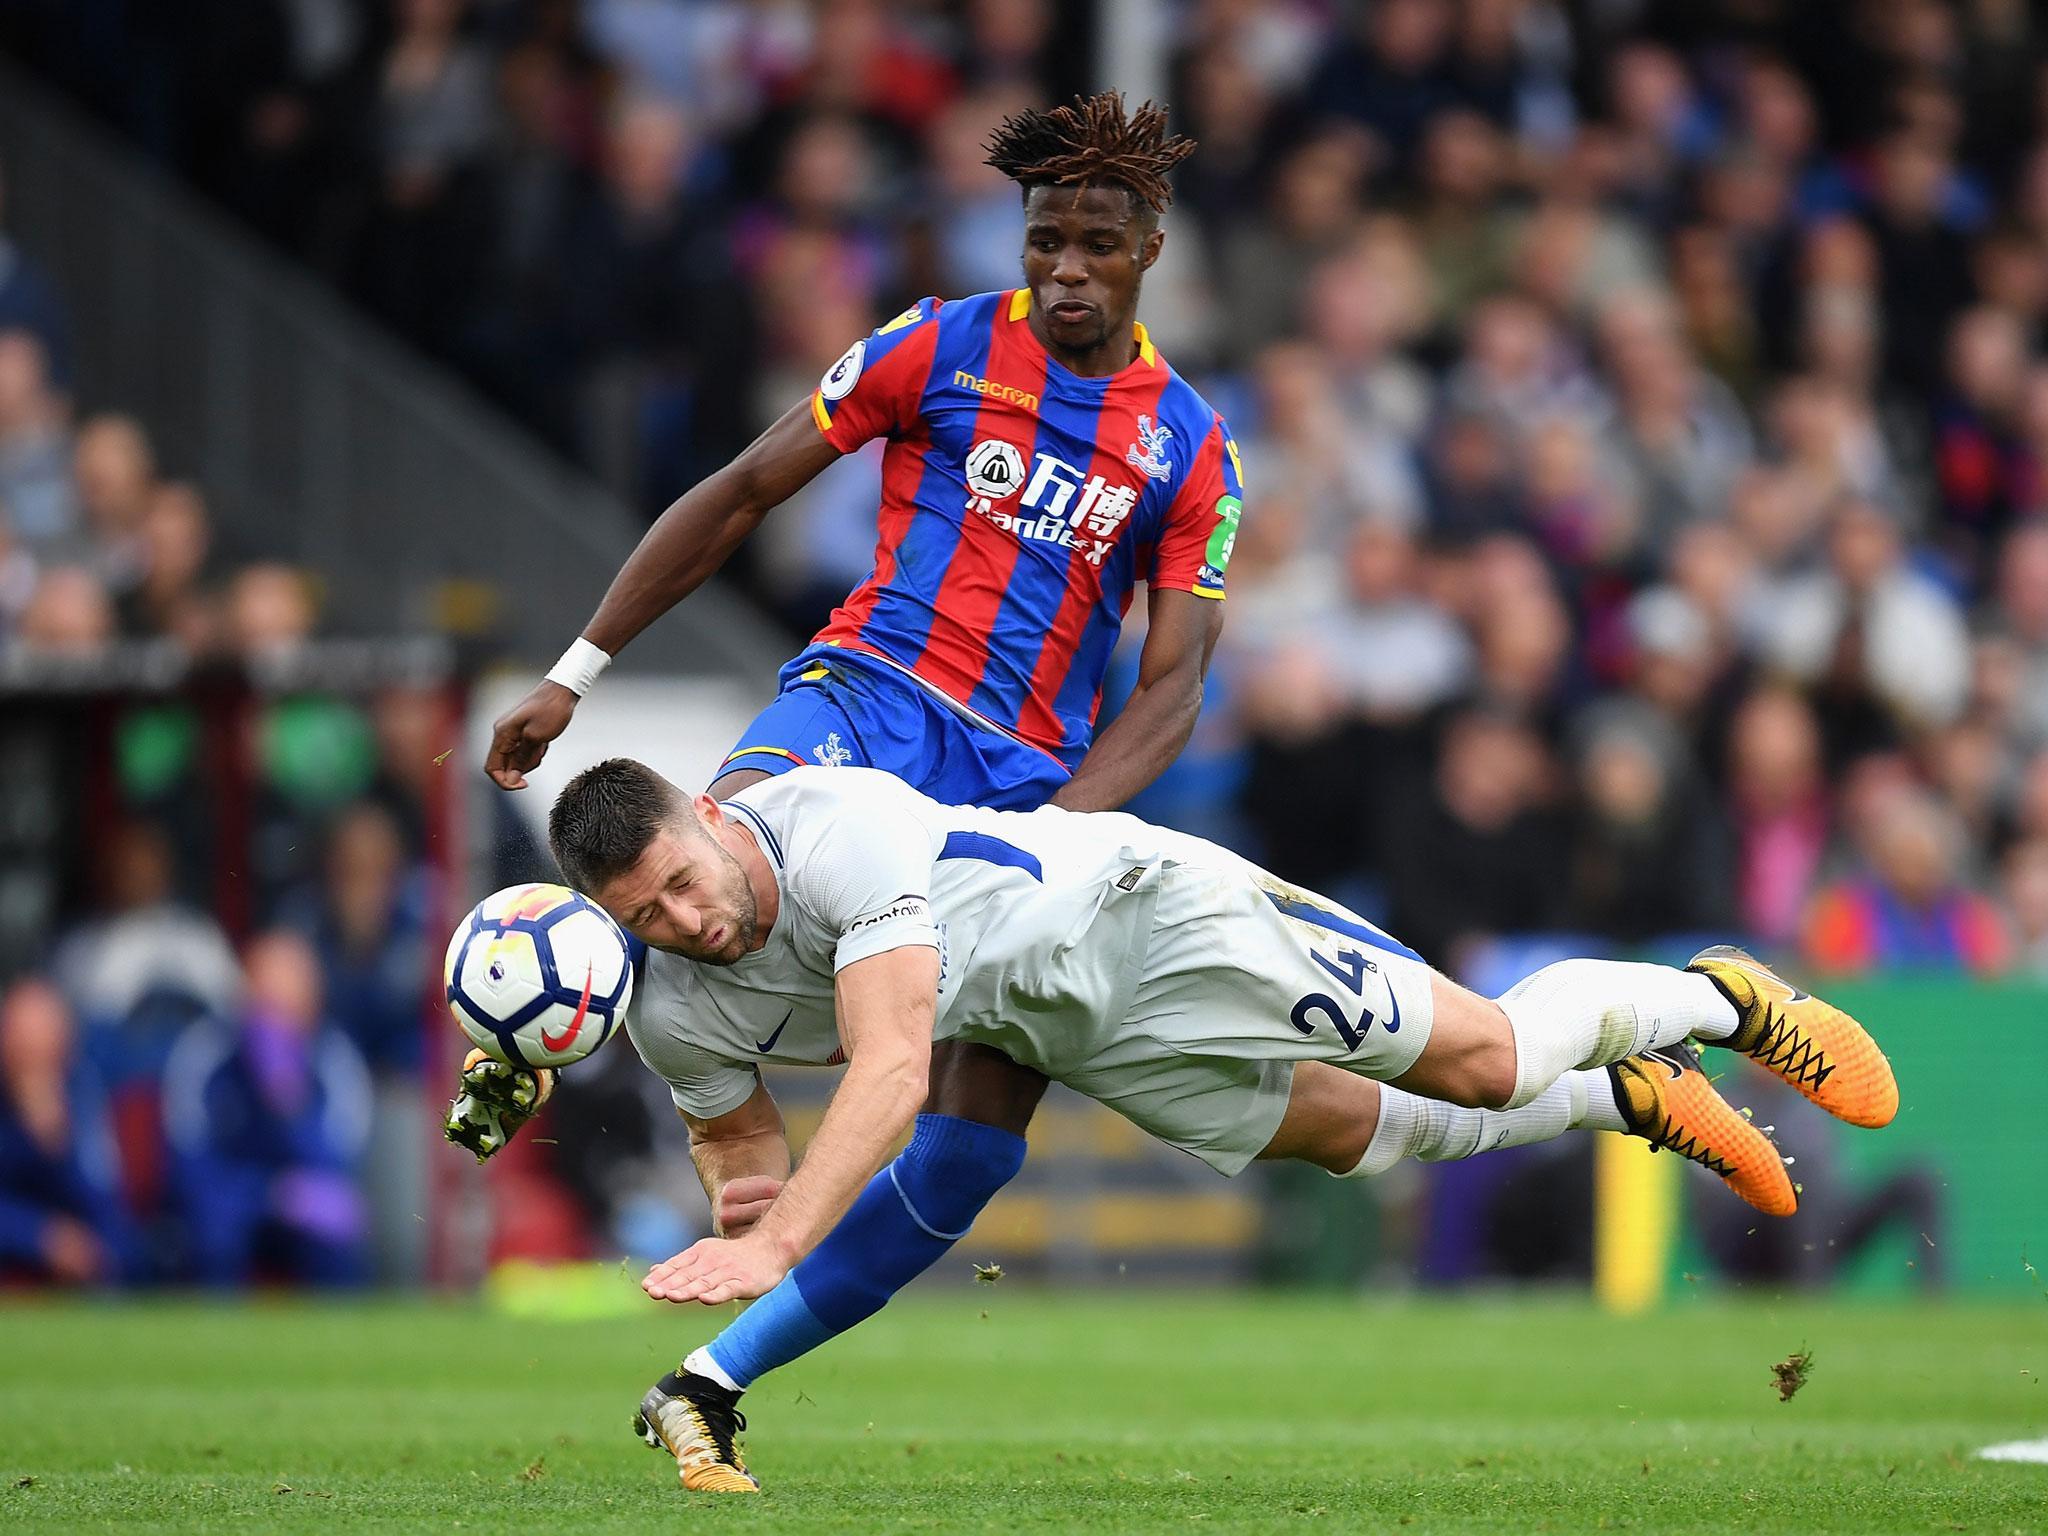 Chelsea went down to Crystal Palace on Saturday afternoon